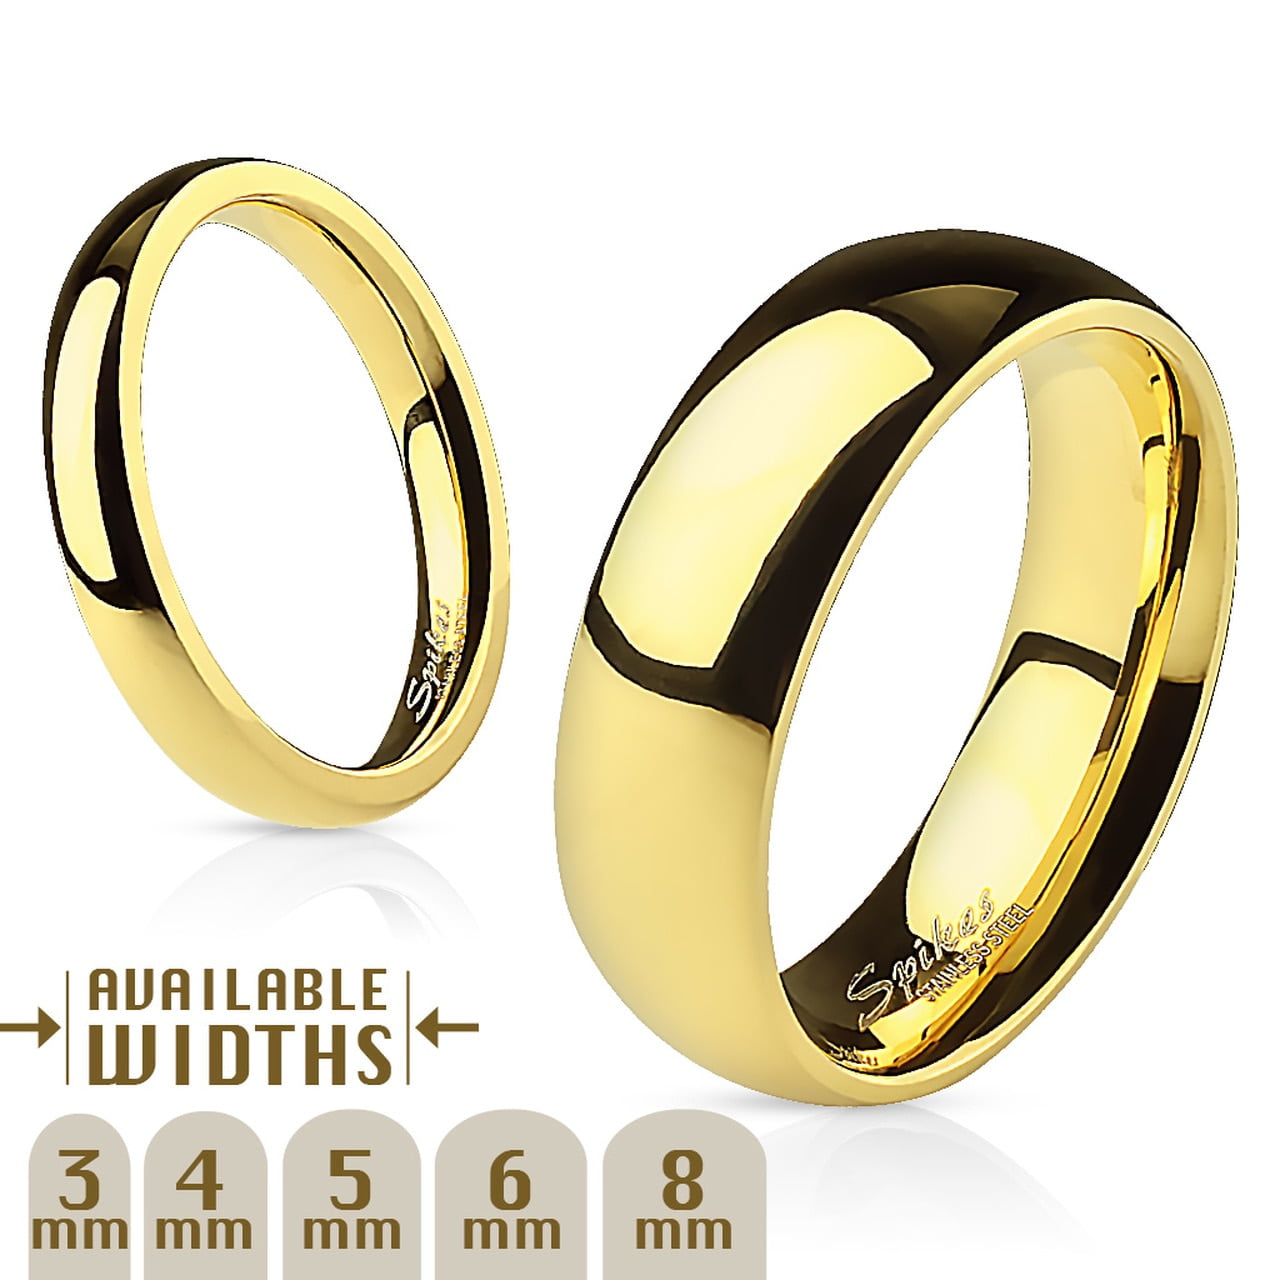 10kt Yellow Gold 5 mm Wide Half Round Ultra-Light Wedding Band Sz 4-12 Available 